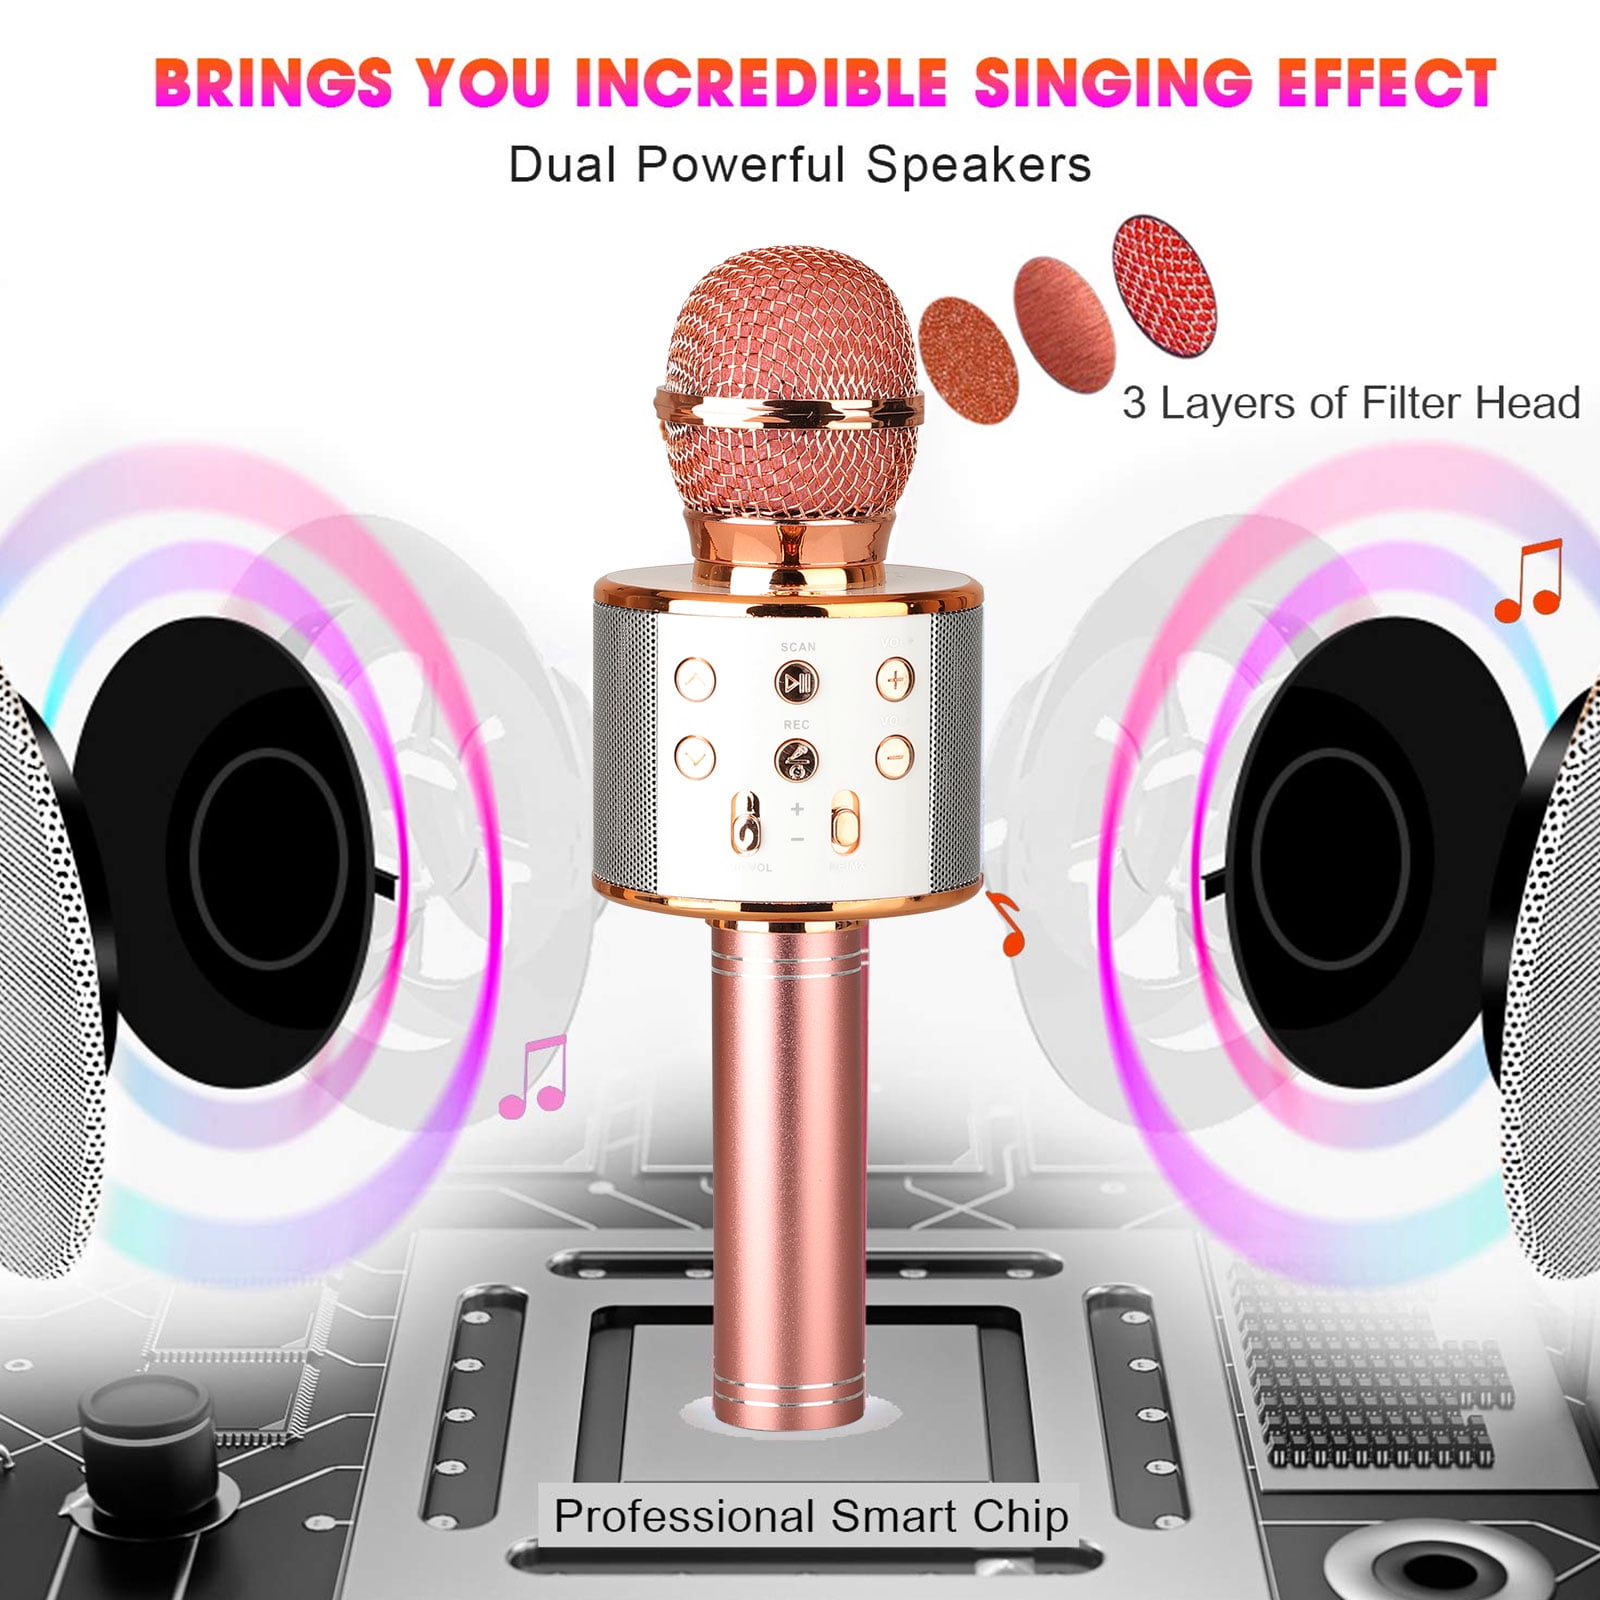 Wireless Bluetooth Karaoke Microphone,Portable Handheld Karaoke Mic Speaker Machine for Kid Adult Girl Home Party Singing Birthday Gift compatible with Android/iPhone/PC or All Smartphone Qarfee Gold 